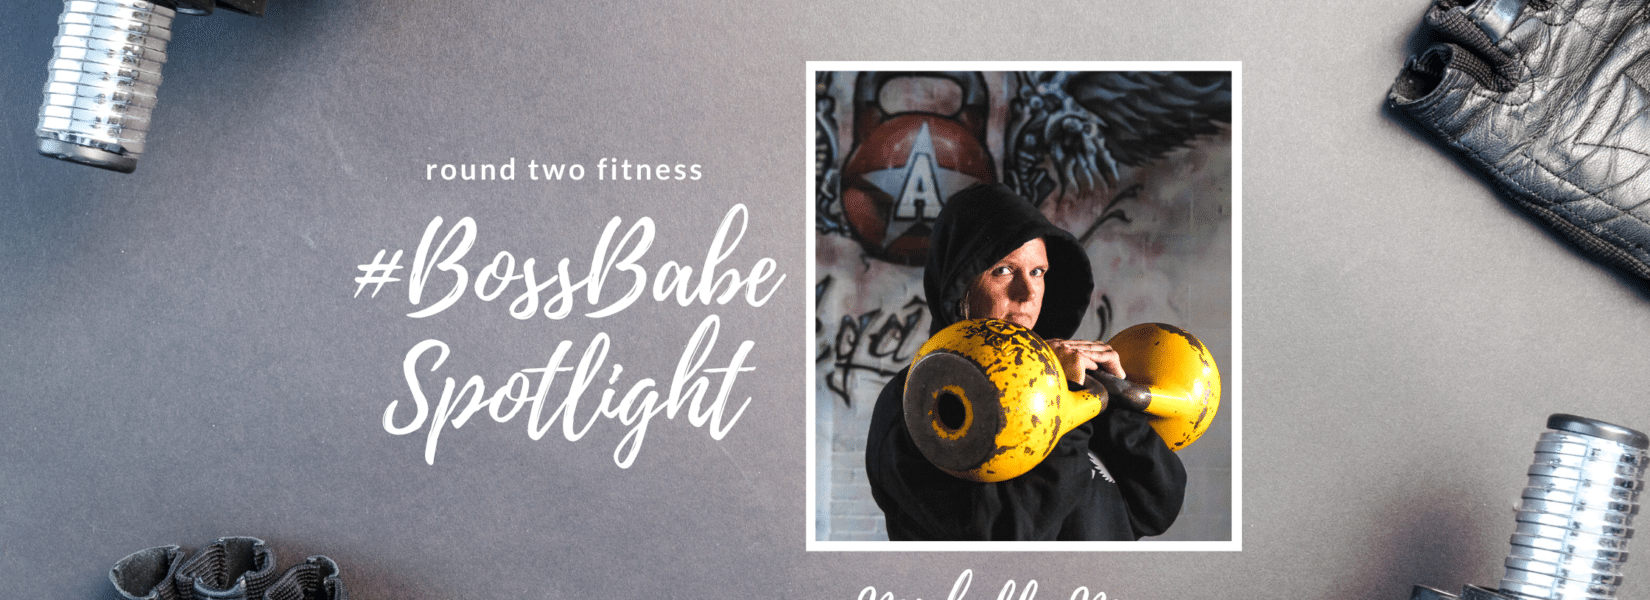 Boss Babe Spotlight: Michelle Munro from the Classroom to Kettle Bells